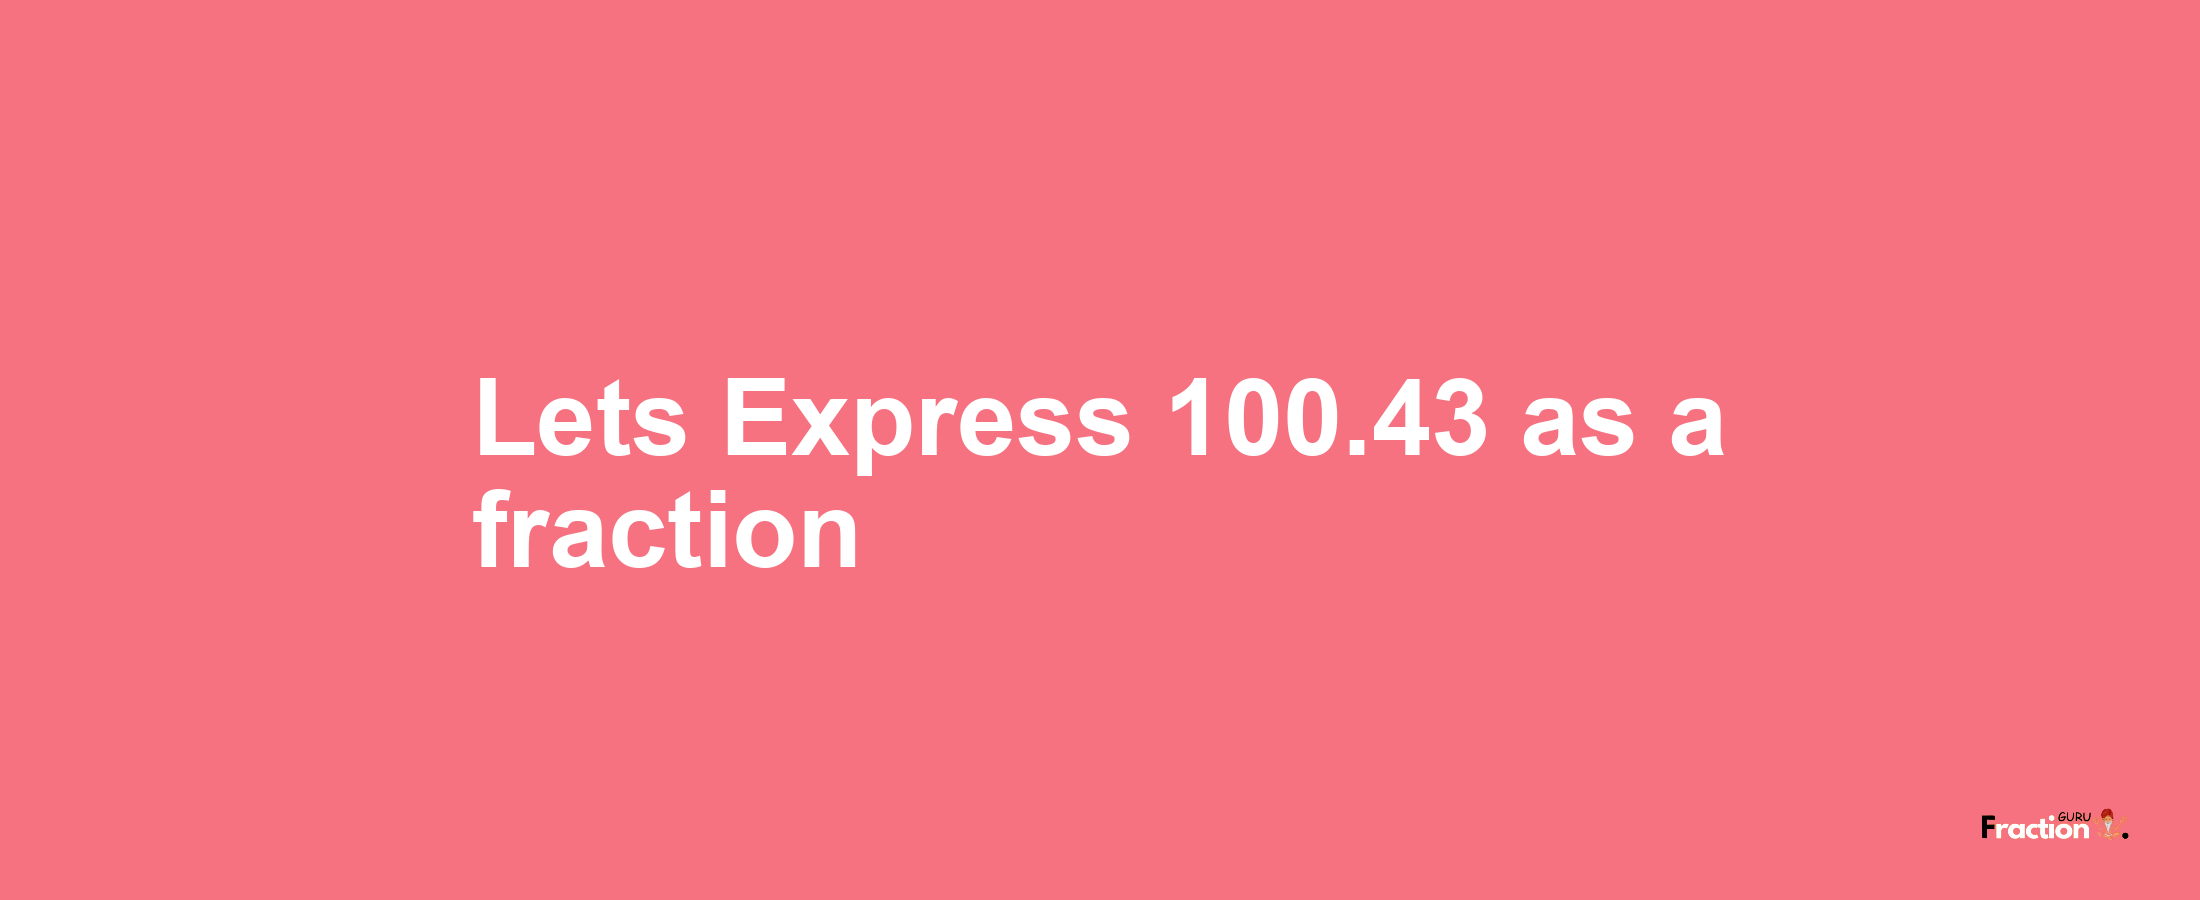 Lets Express 100.43 as afraction